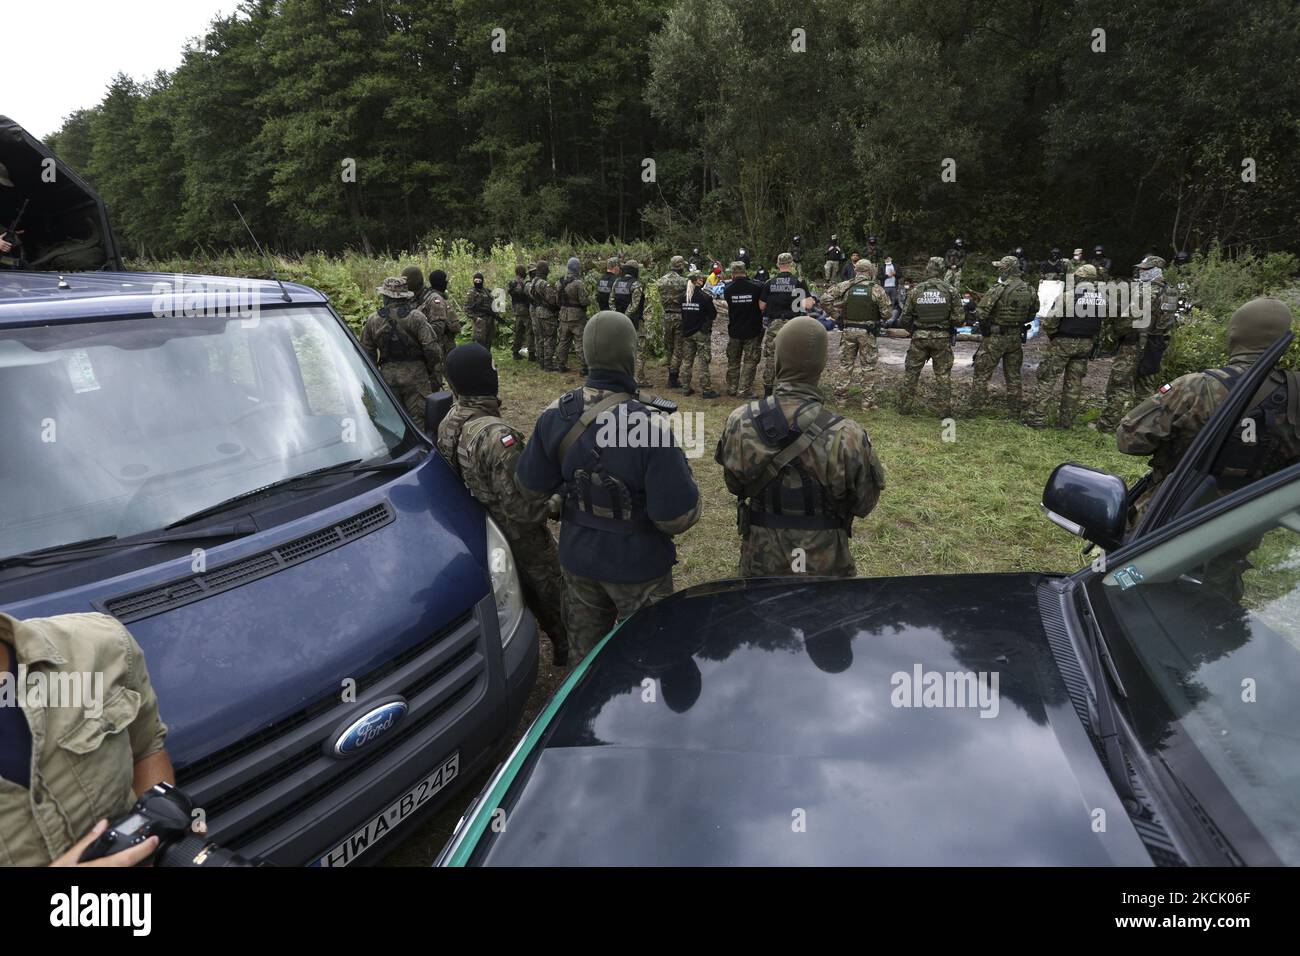 Polish border guards are seen near the border with Belarus on 20 August, 2021 in Usnarz Gorny, Poland. Around 32 Afghan citizens are being held in place on the border by Polish border guards and Belarusian forces. The refugees are now pawns in a game between Lukashenko's regime who is expelling them forcefully over the border in retlation for EU sanctions and the Polish government which says it will protect Poland from illegal migrants.In the last weeks Belarusian authorities have been pushing an increasing number of refugees, mainly from Iraq over the borders of Poland, Lithuania and Latvia.  Stock Photo